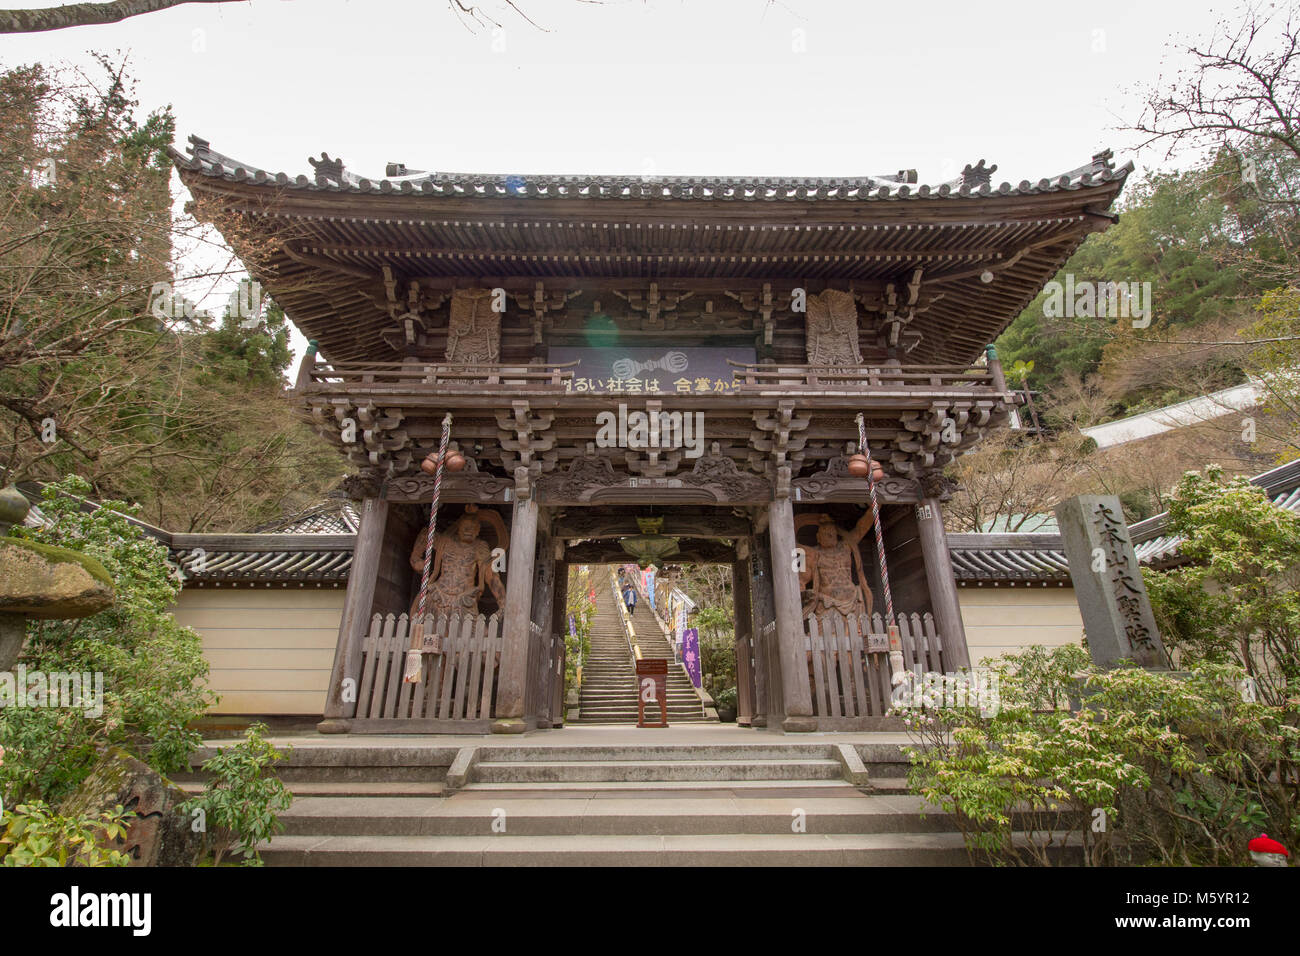 Buddhist temple in Hatsukaichi, Japan.   Daishō-in or Daisyō-in is a historic Japanese temple complex with many temples and statues on Mount Misen Stock Photo